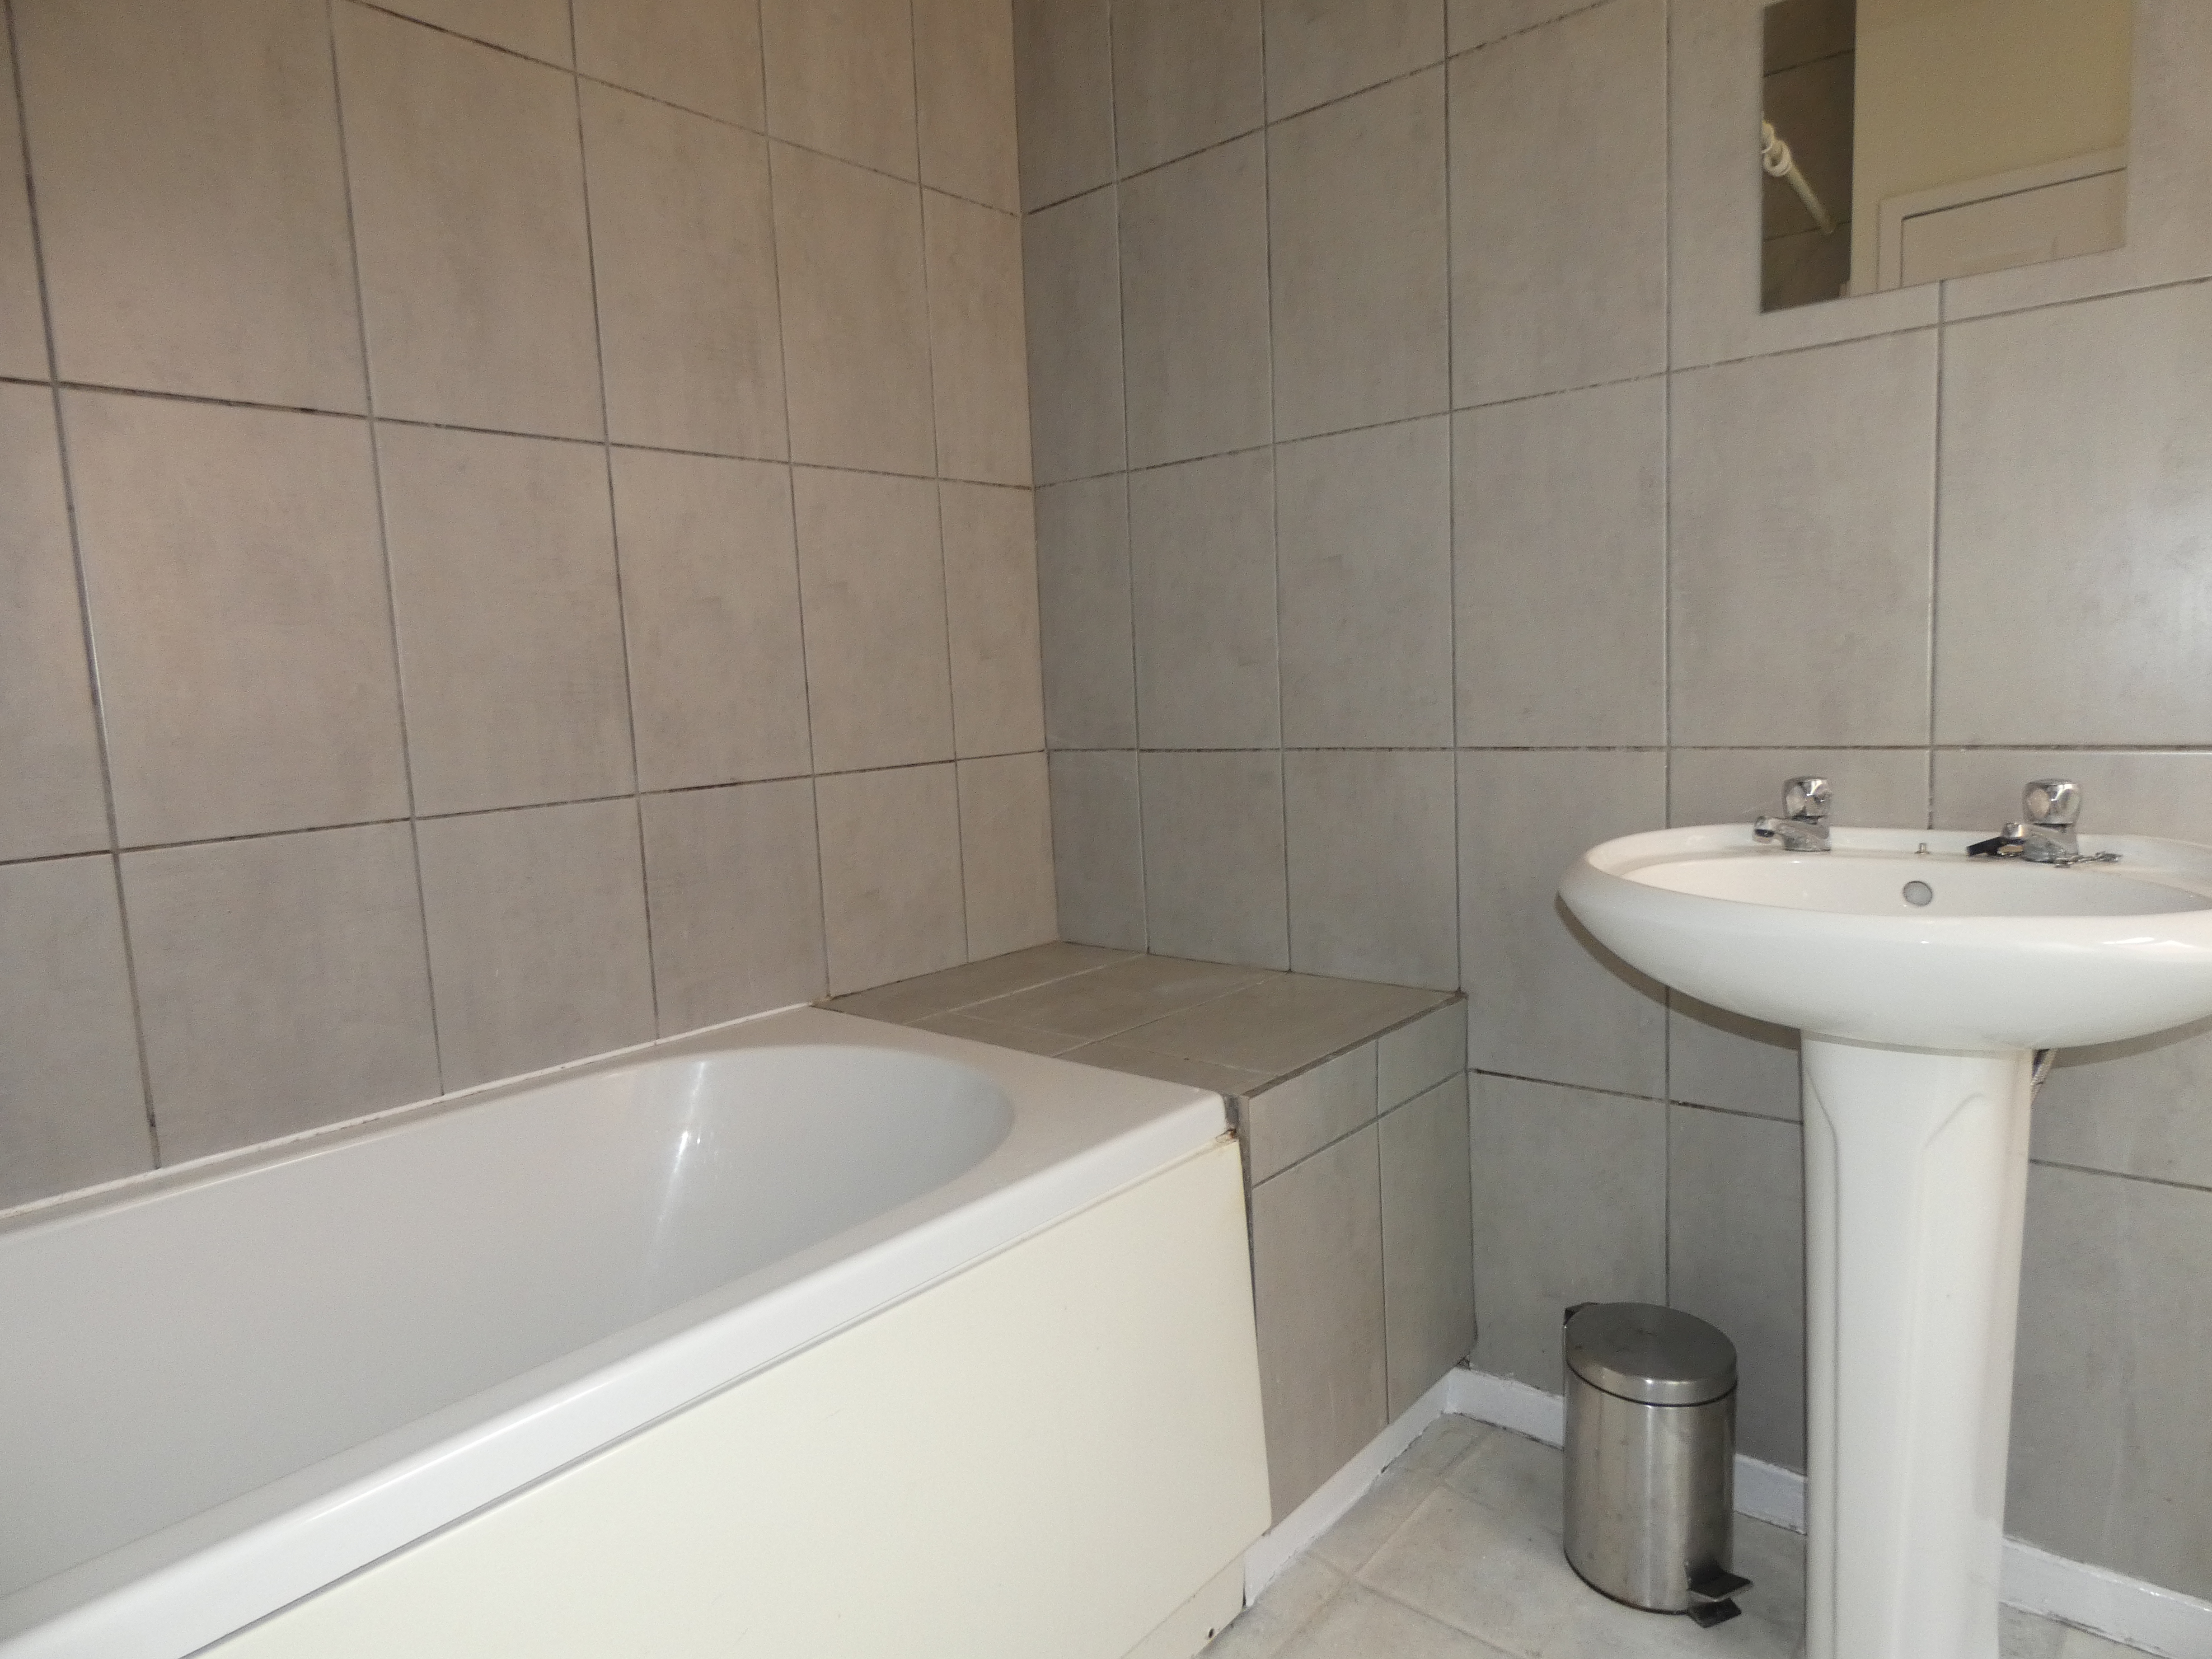 2 bed flat to rent in Cartington Terrace, Newcastle upon tyne  - Property Image 8